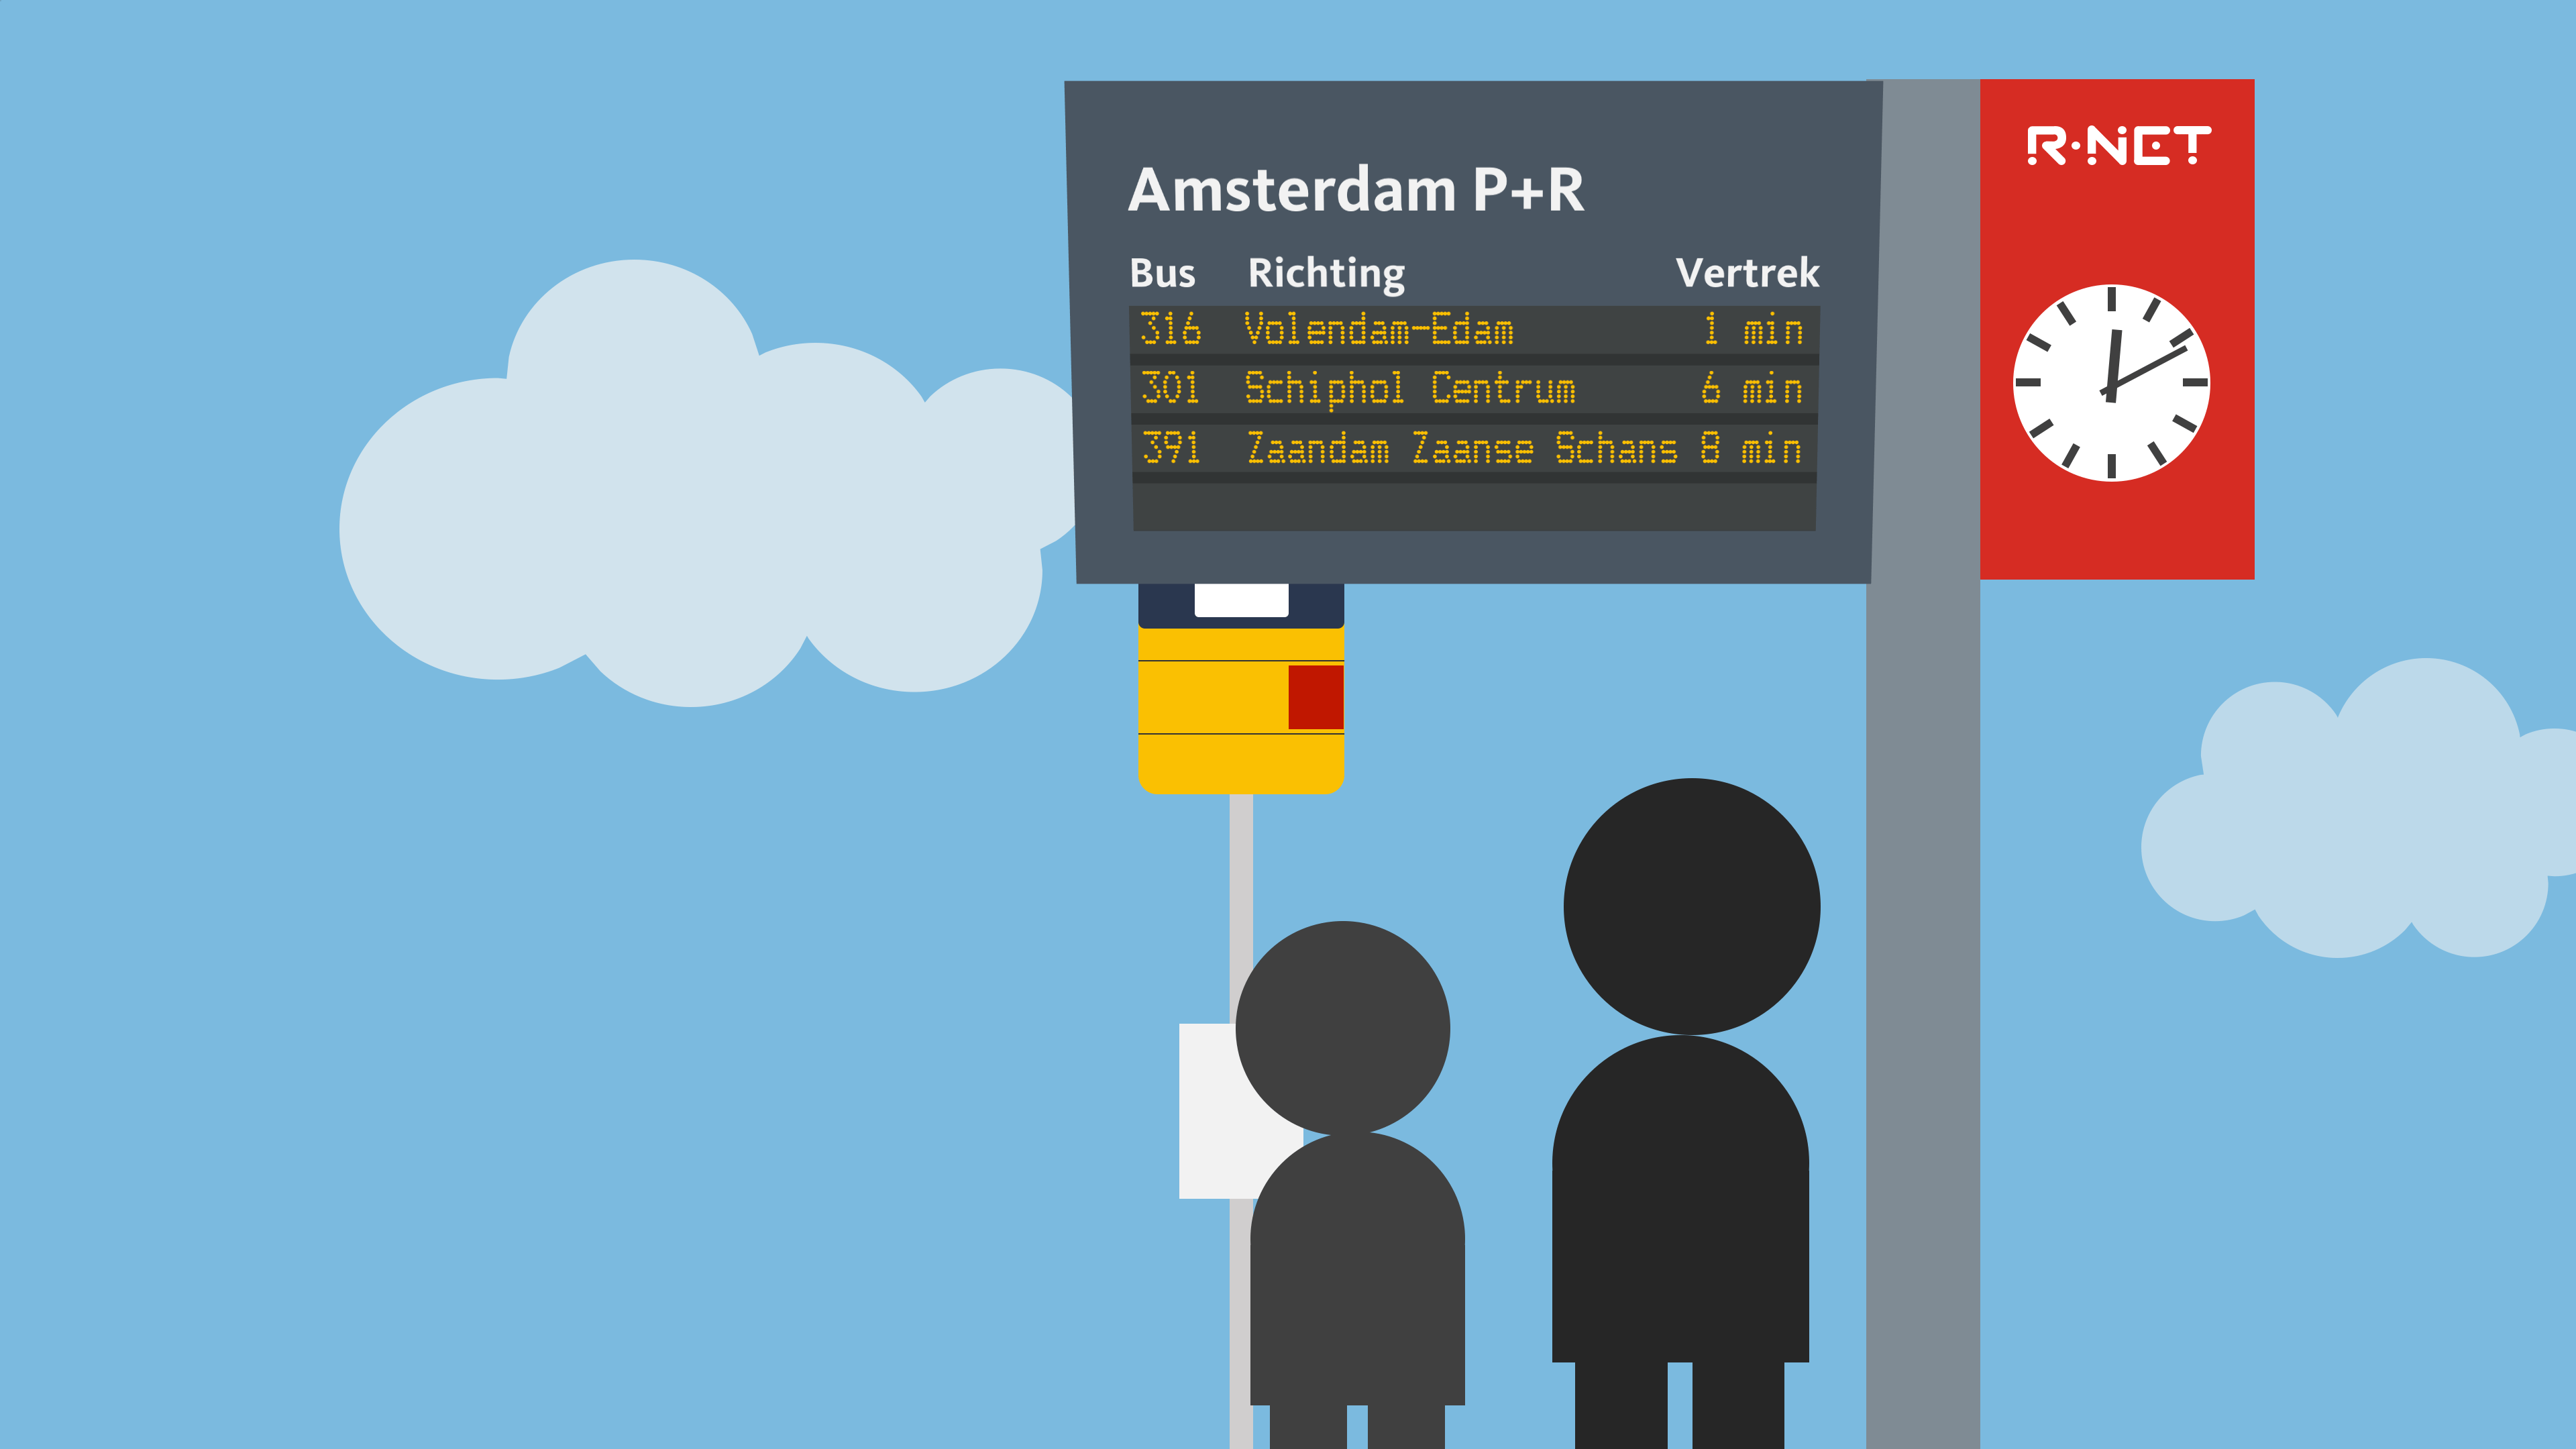 Passenger information system at a bus stop